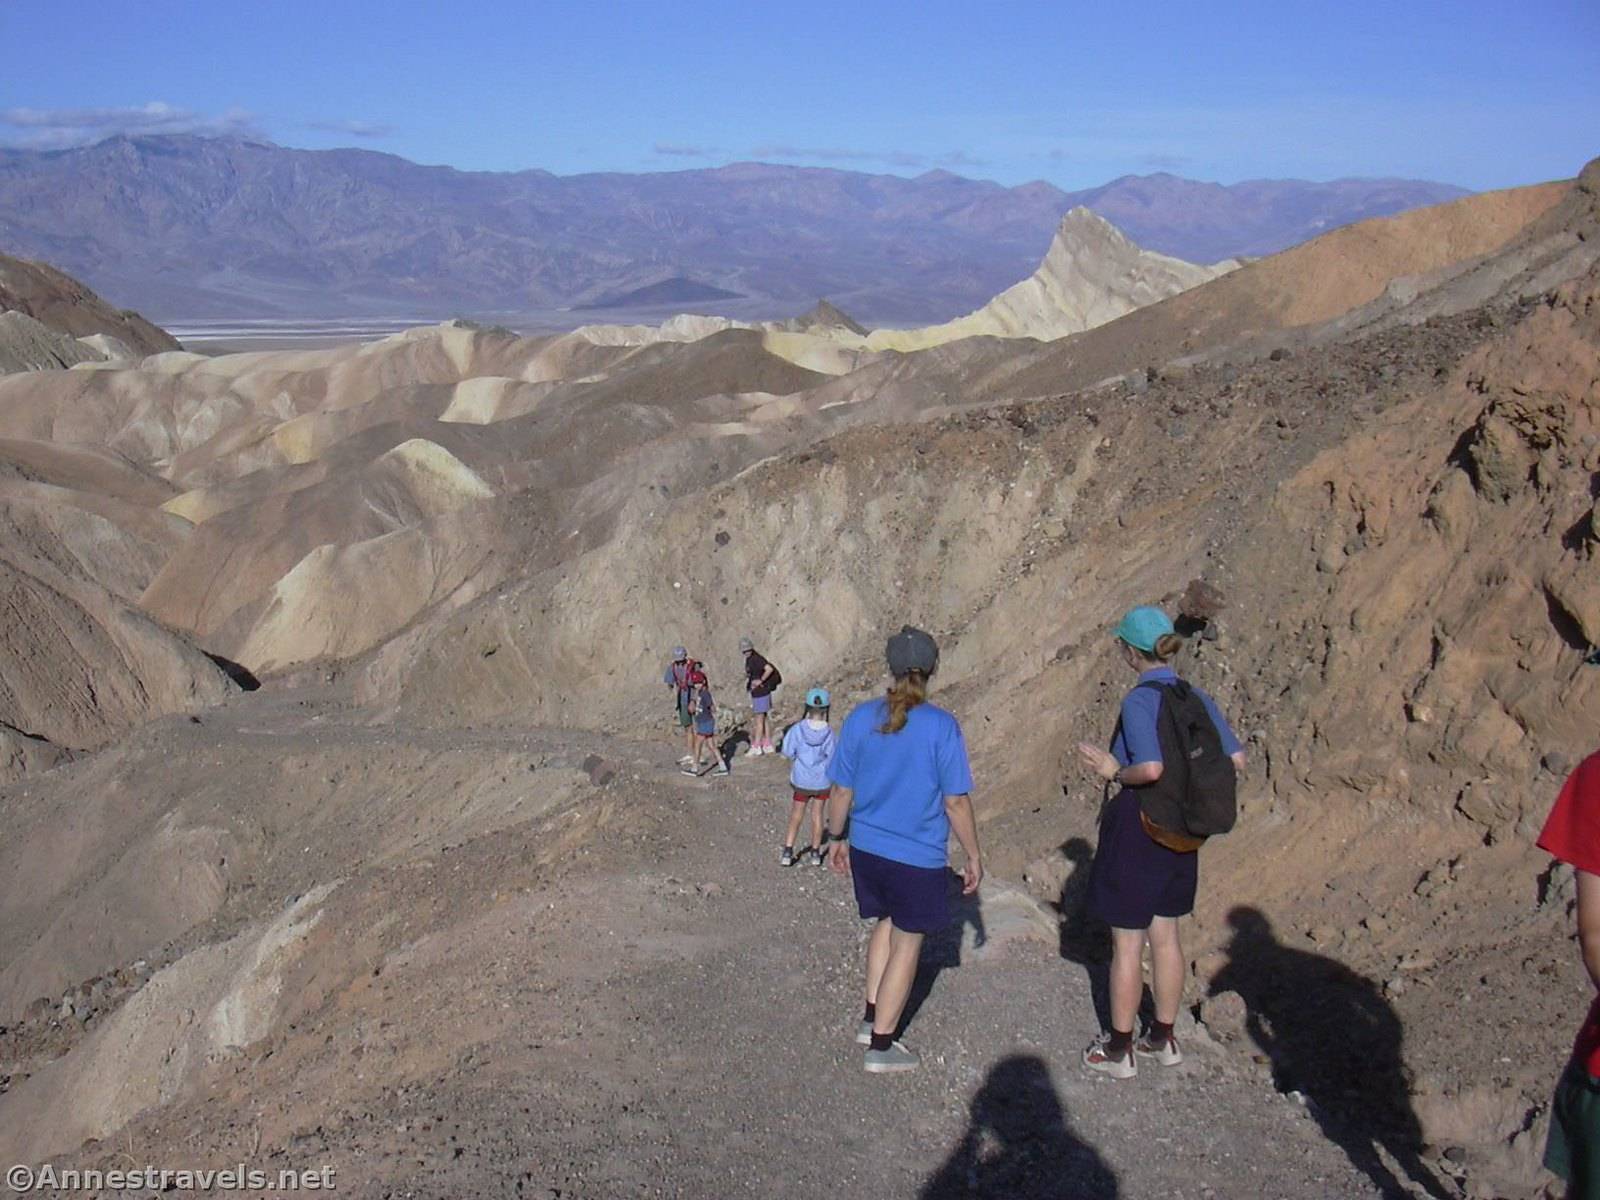 Hikers on the upper Badlands Trail, Death Valley National Park, California